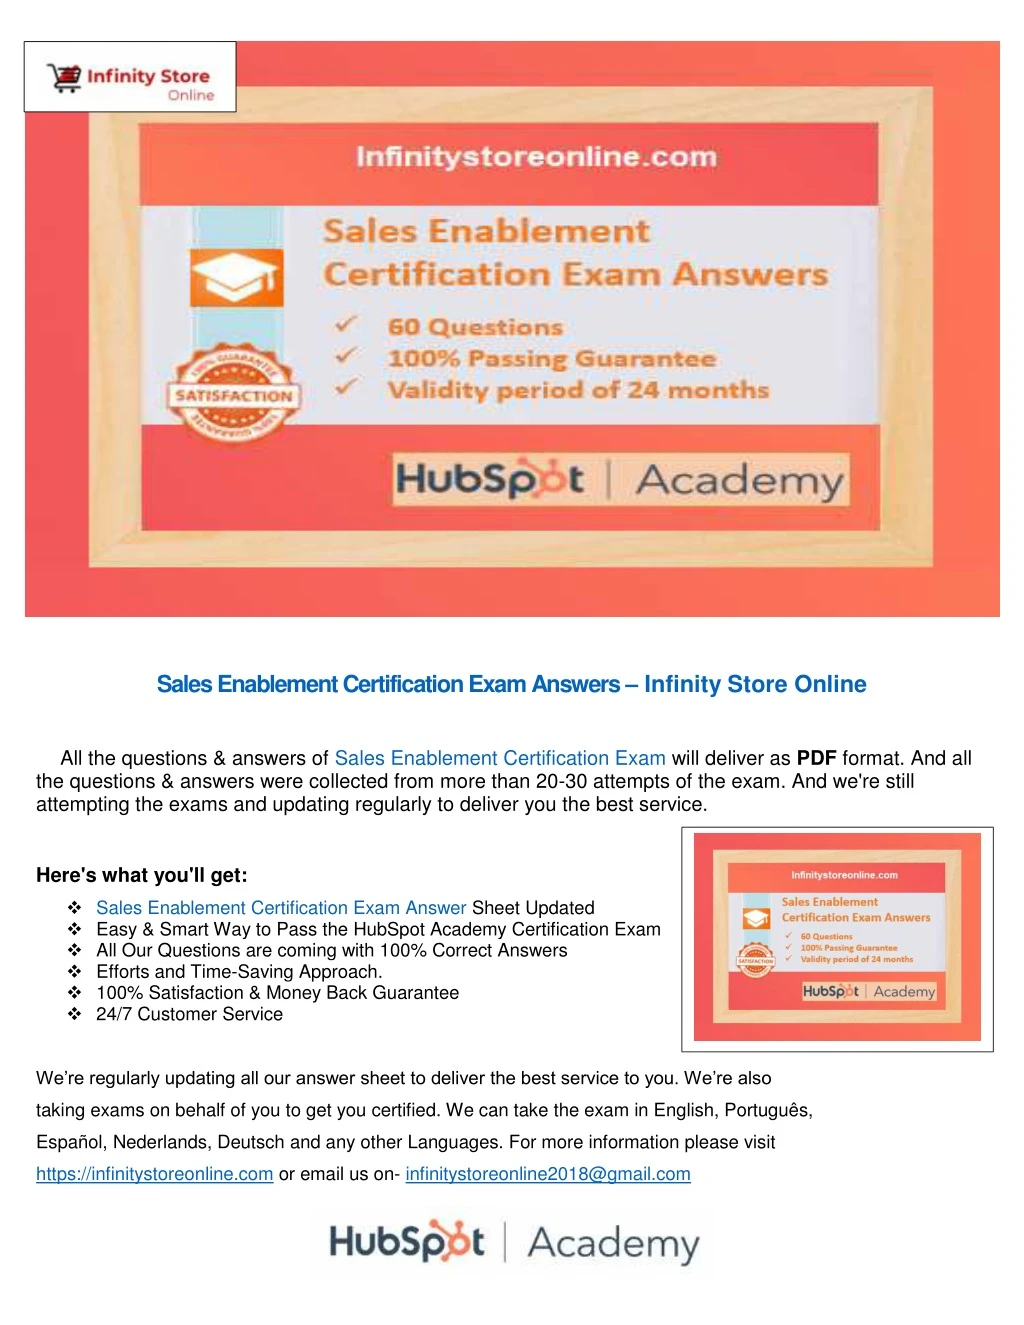 sales enablement certification exam answers